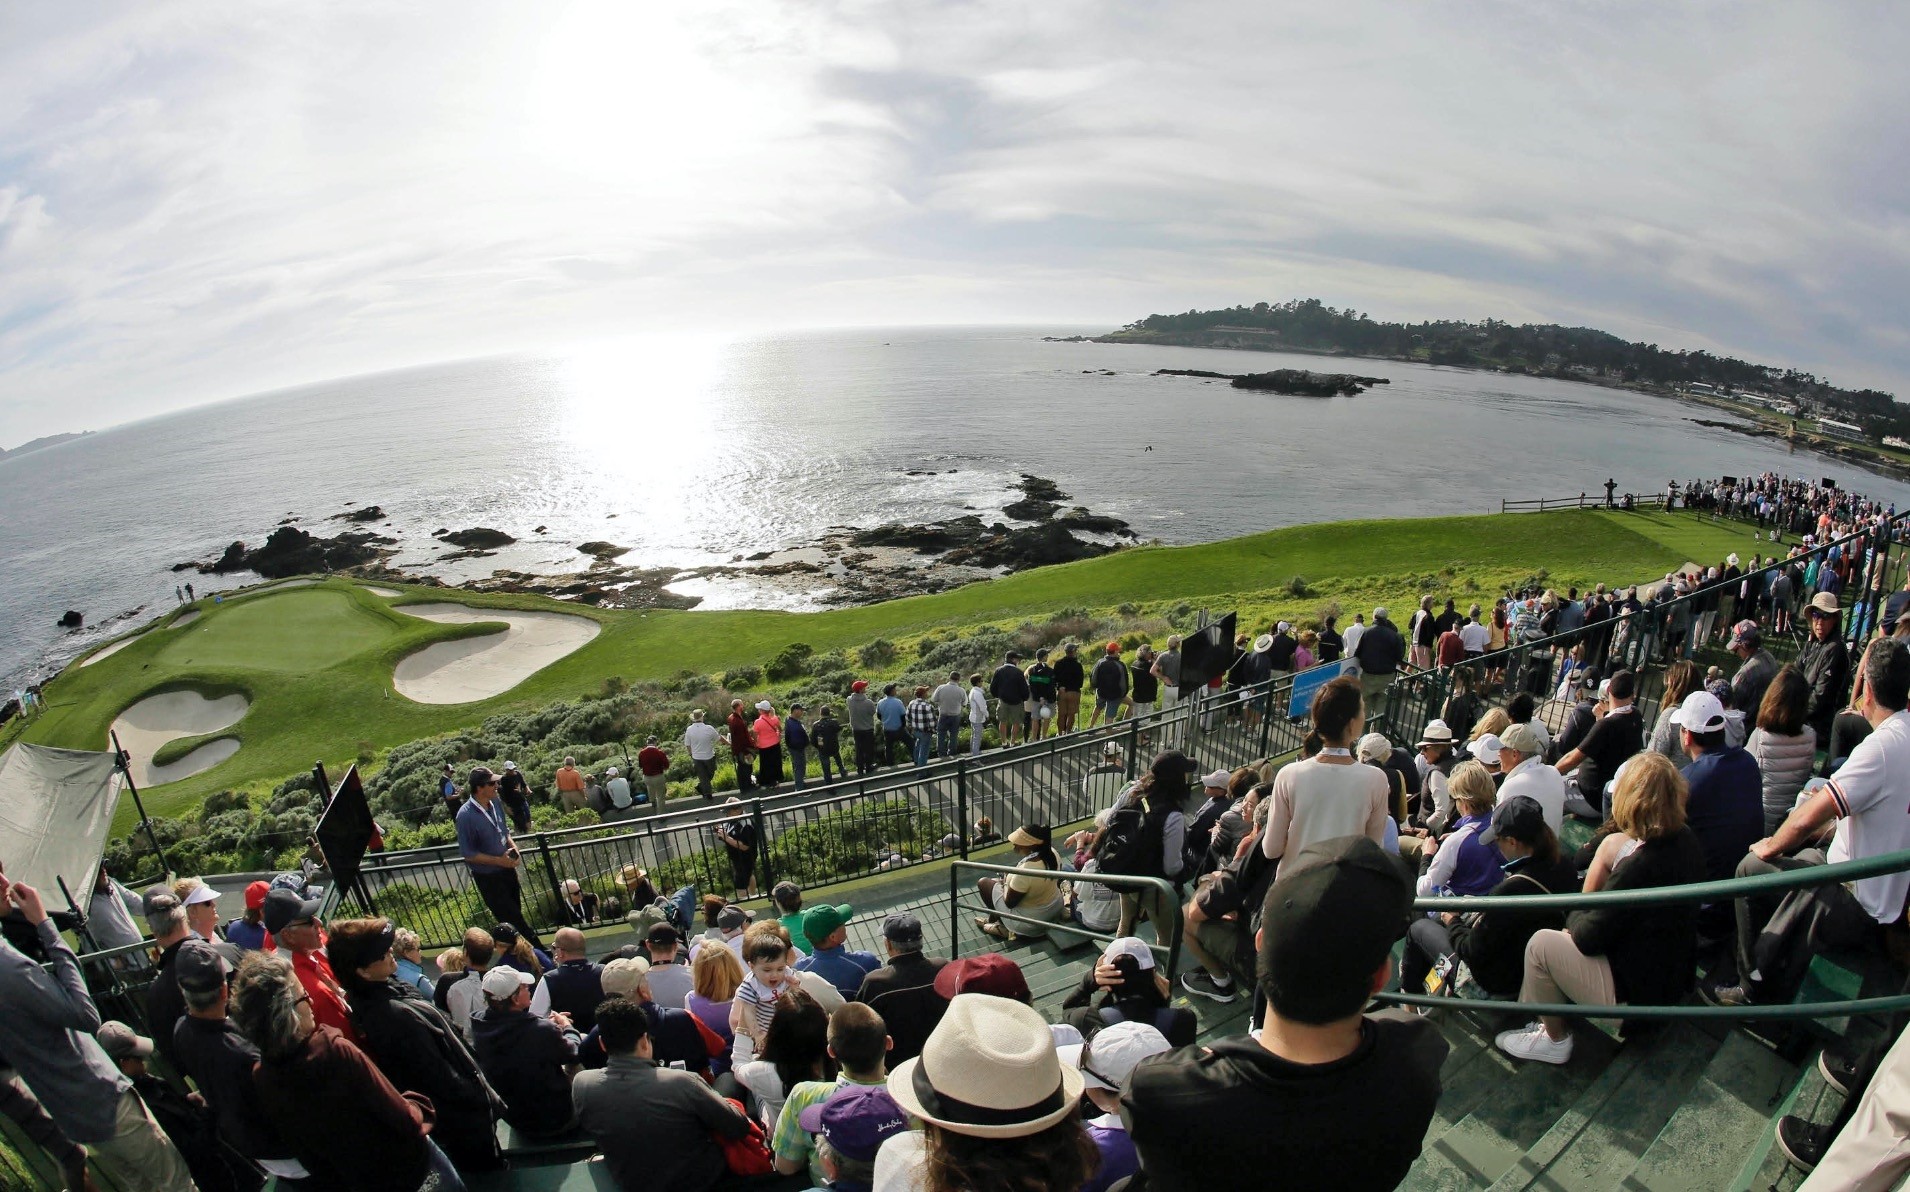 Fans line the seventh hole of the Pebble Beach Golf Links to watch the inaugural $1 million celebrity hole-in-one event of the AT&T Pebble Beach National Pro-Am golf tournament in Pebble Beach, Calif.